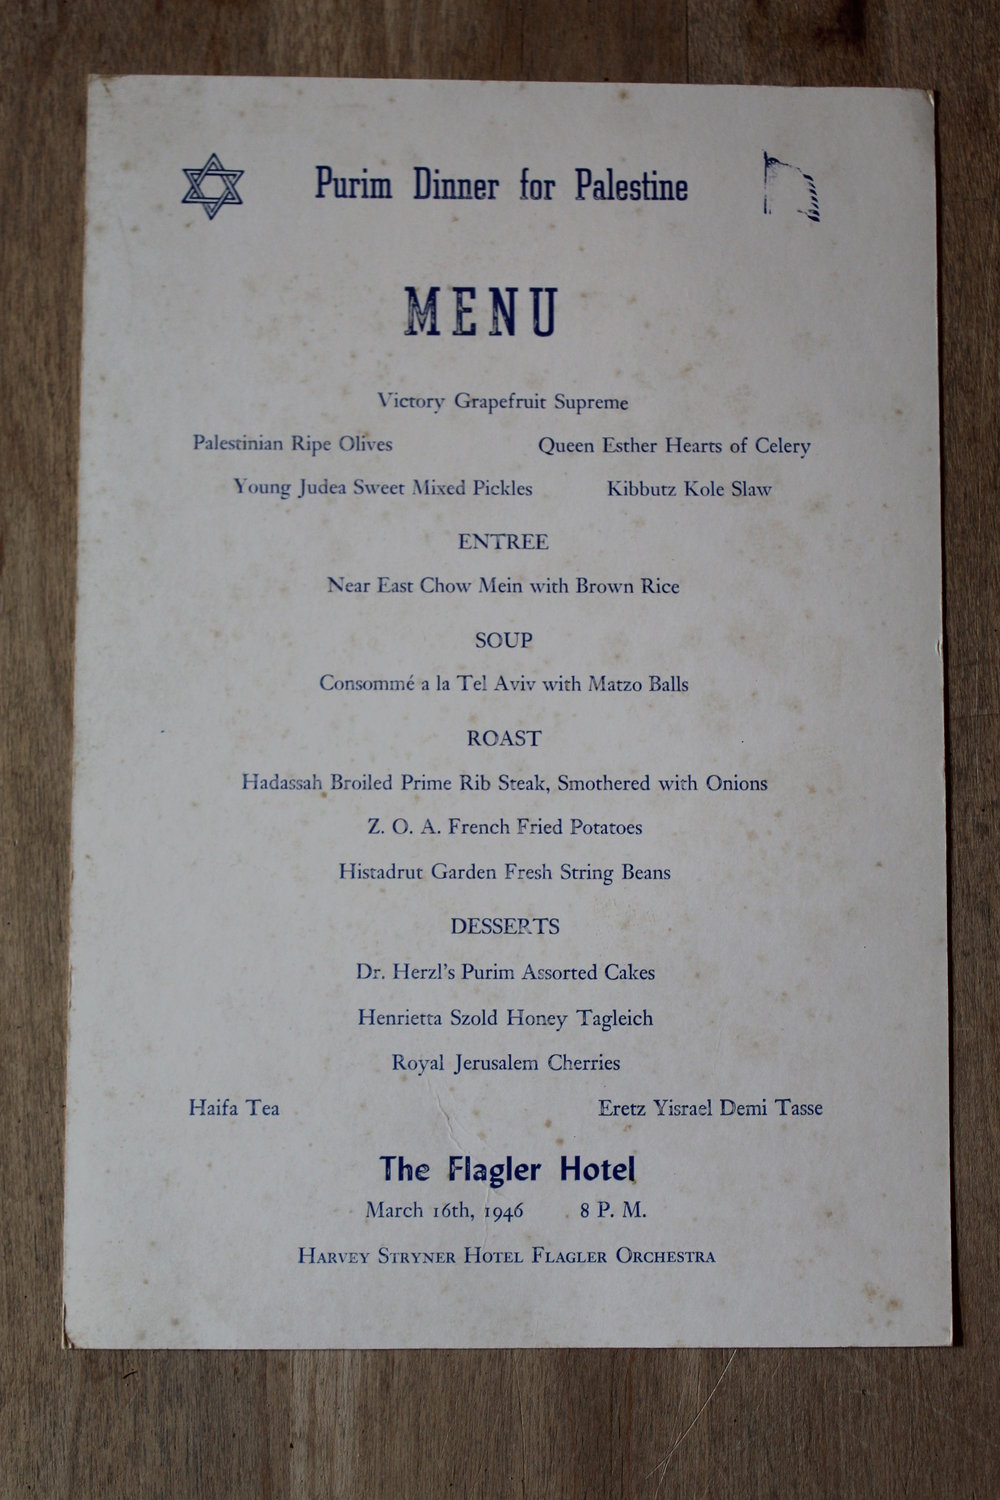 Mountaindale resident Allen Frishman has a museum of Catskills memorabilia. That includes this 1946 menu from the Flagler Hotel in Fallsburg.